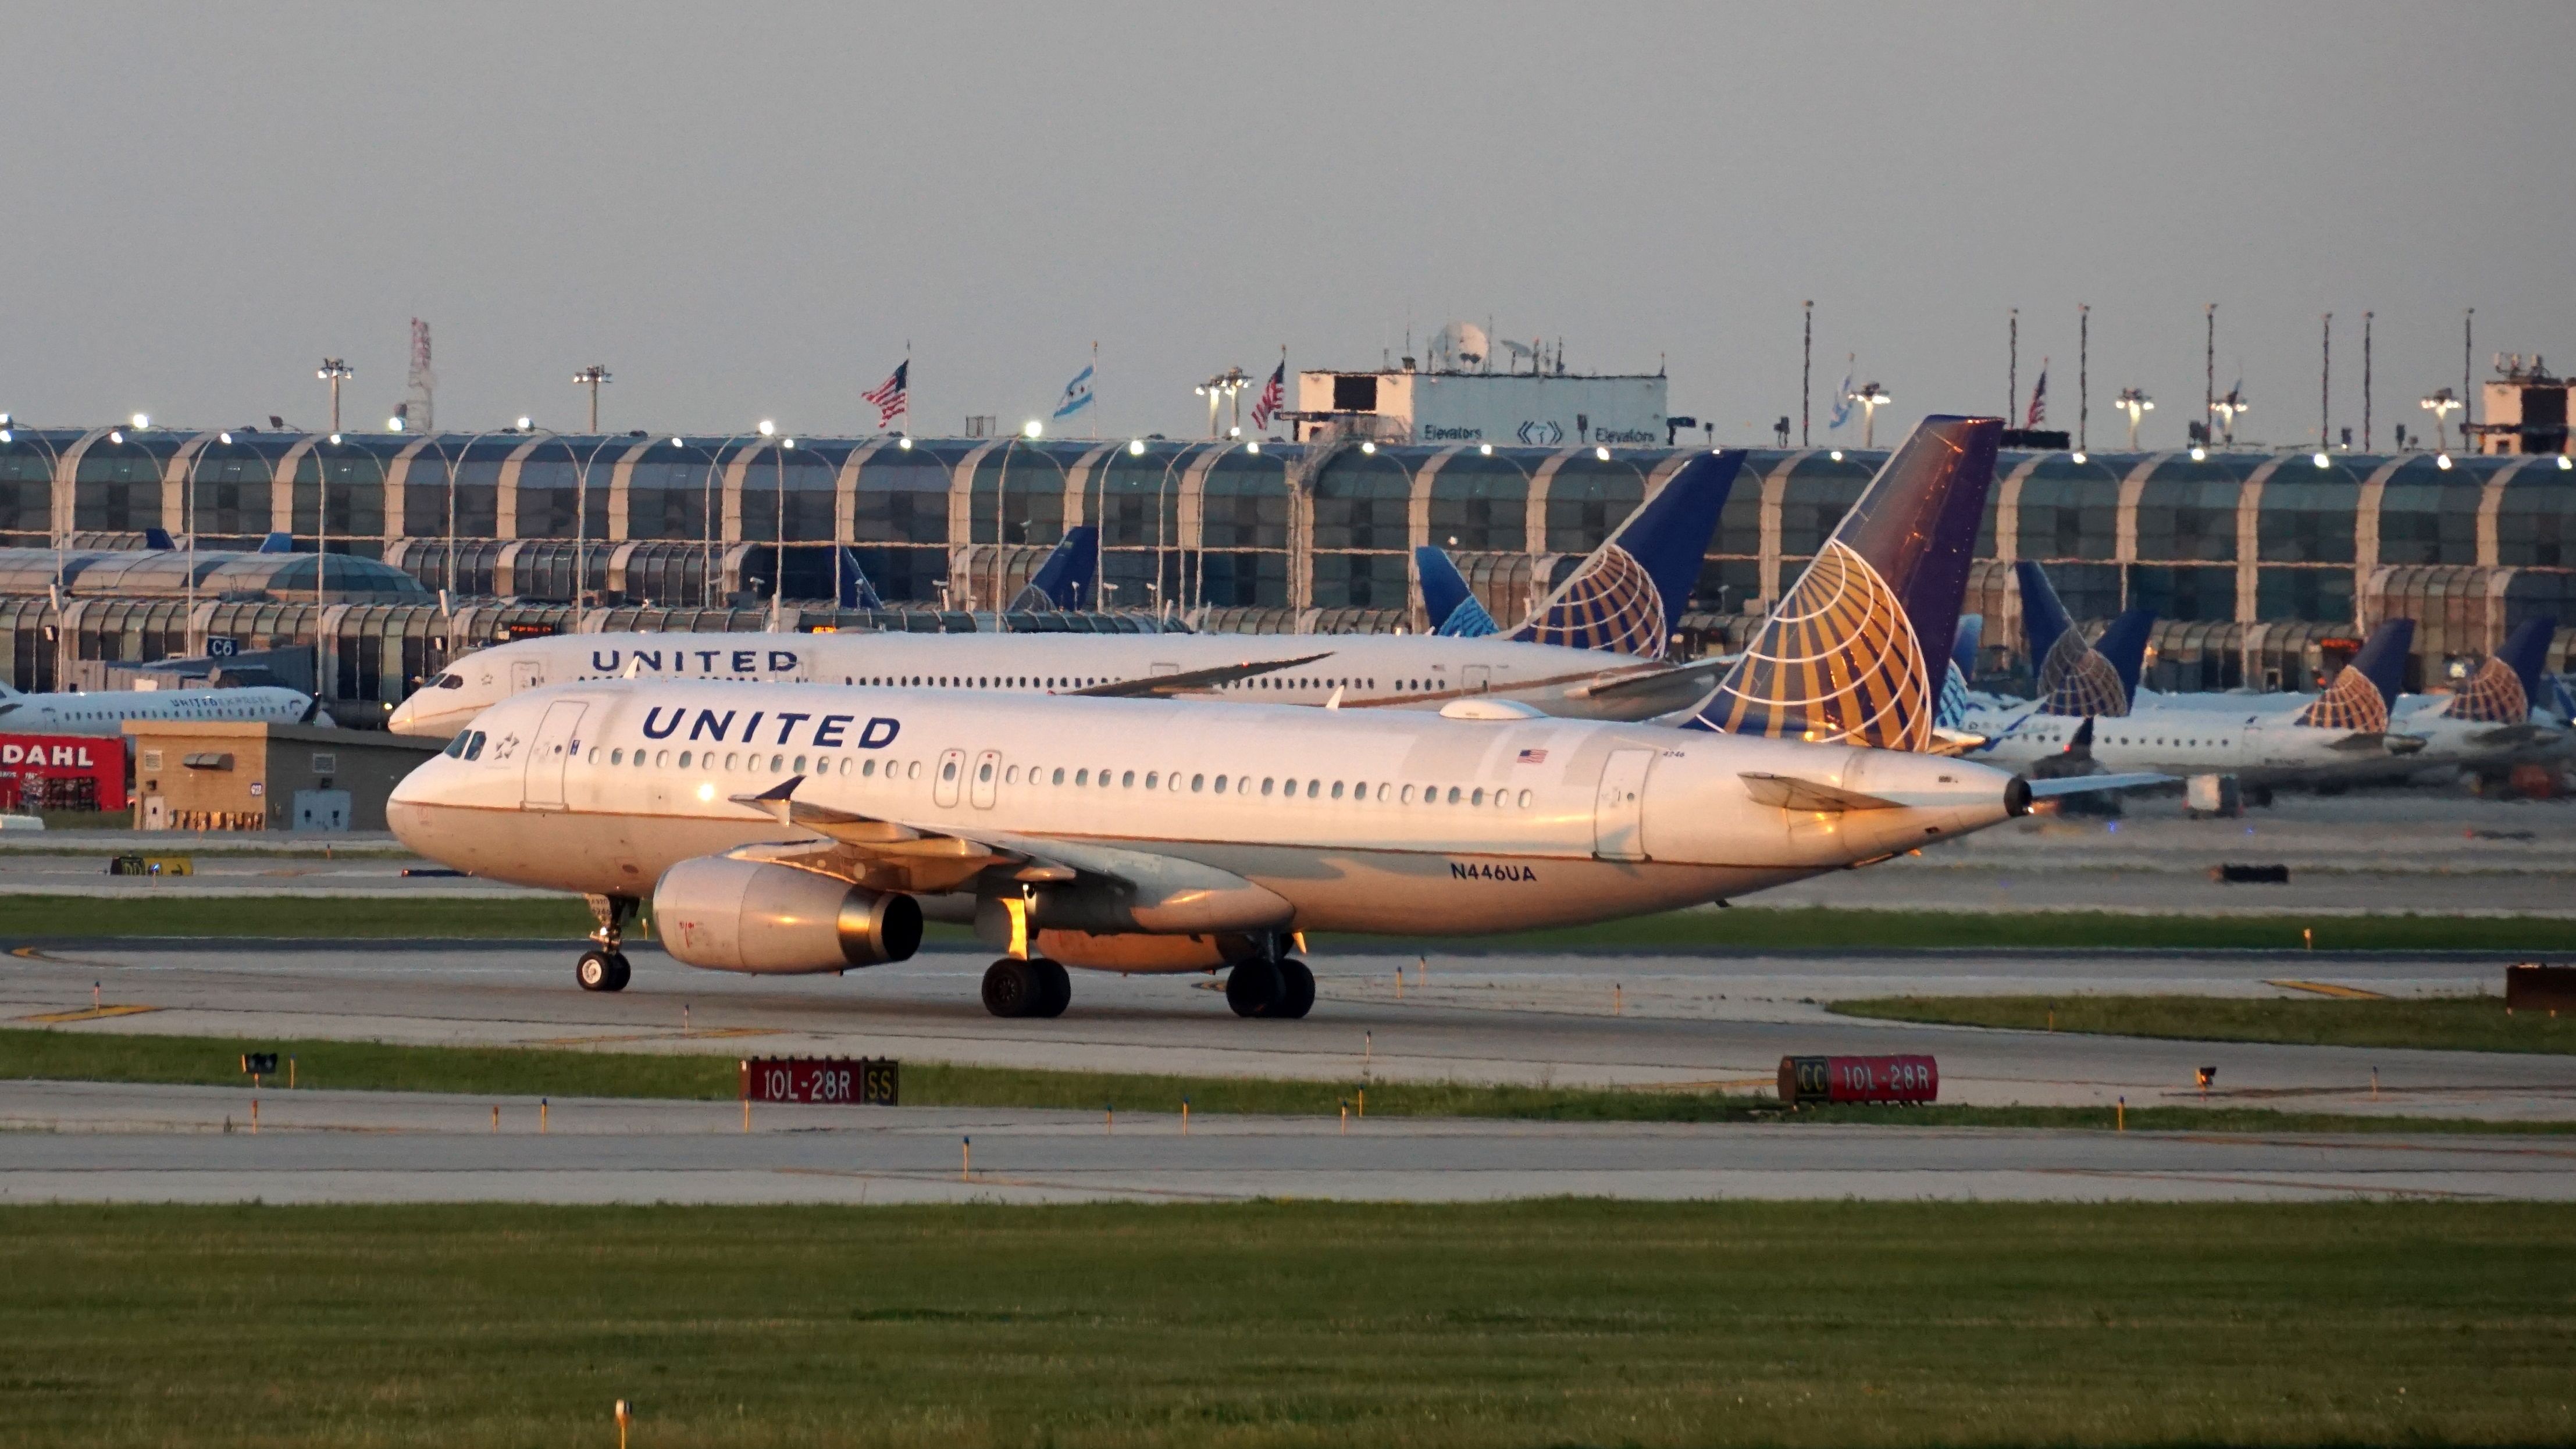 Two United Airlines aircraft on the apron at Chicago O'Hare Airport.